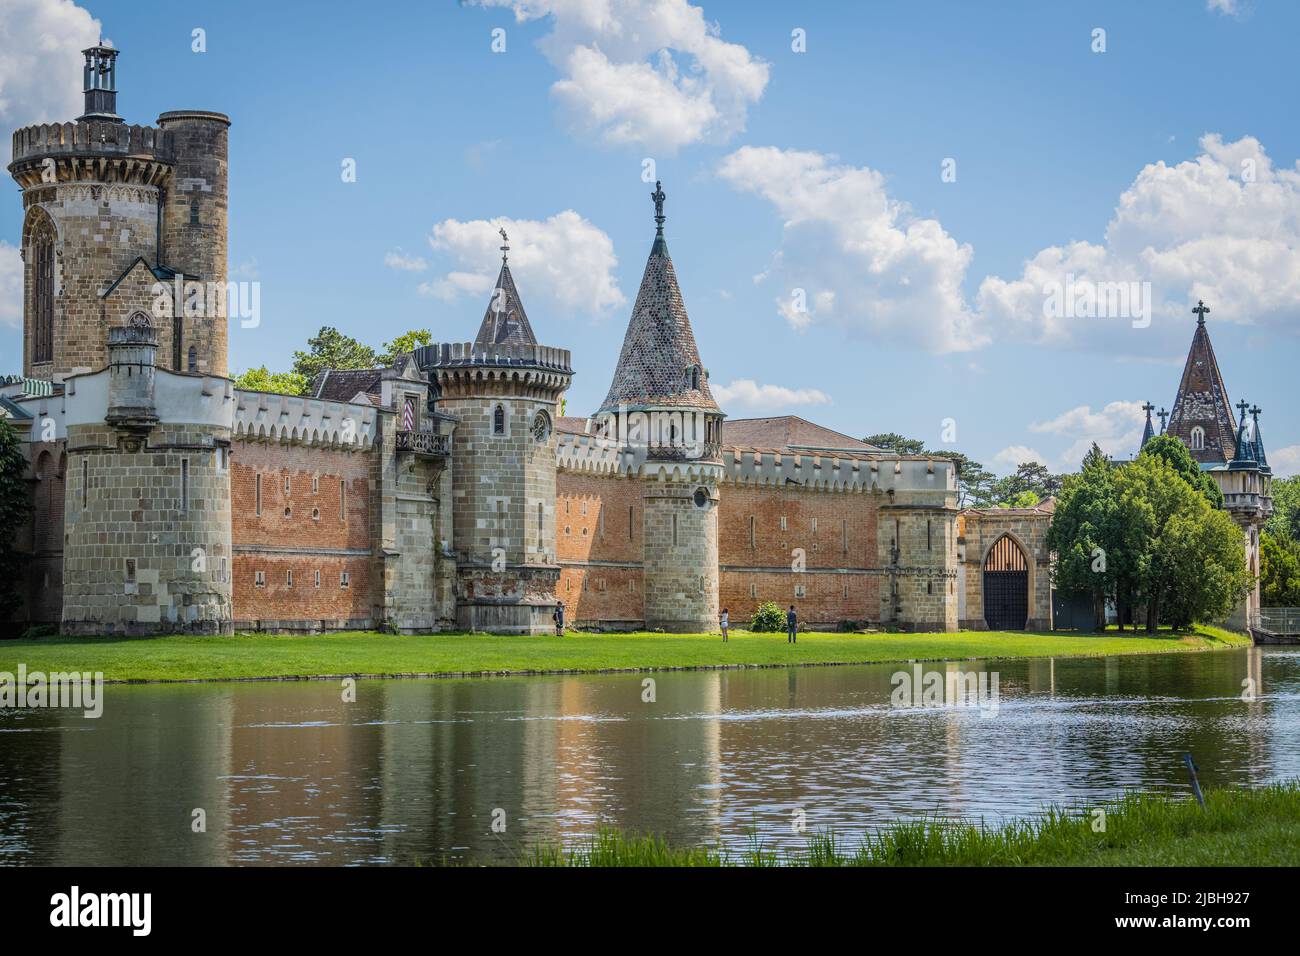 The castles of Laxenburg are located in the municipality of Laxenburg in Lower Austria in the castle park is the old castle and the Franzensburg Stock Photo